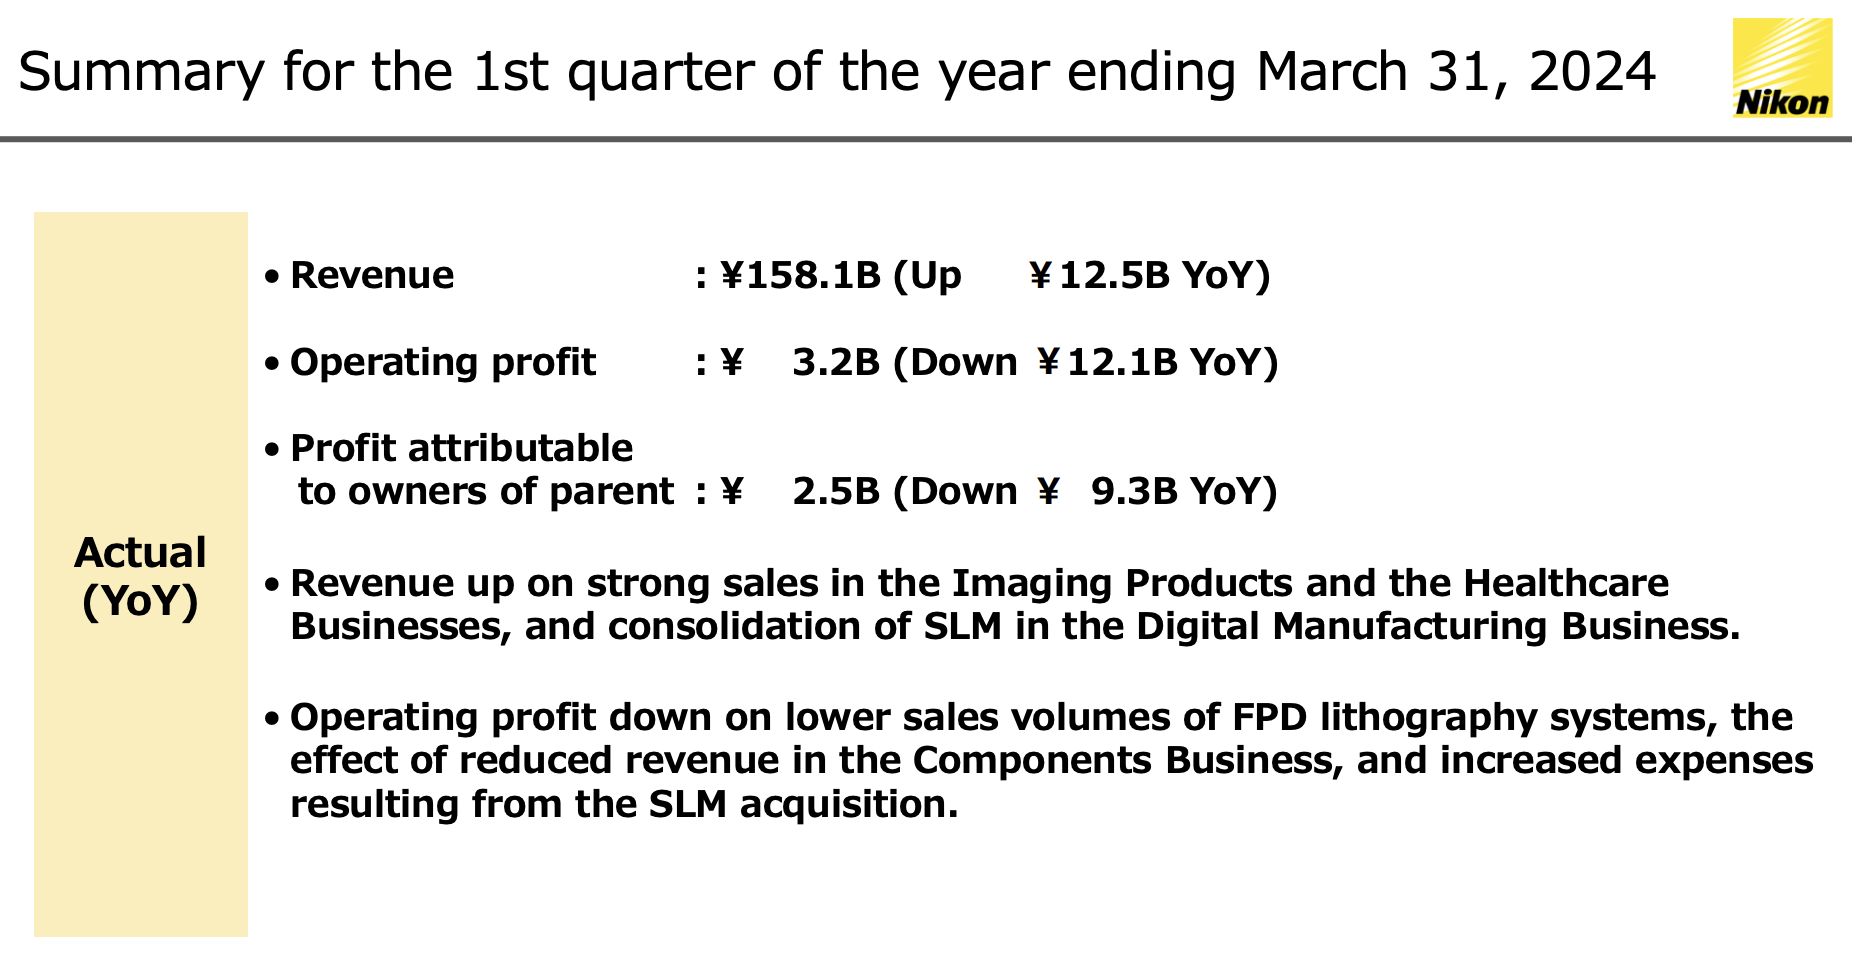 Nikon releases financial results for the first quarter of the year